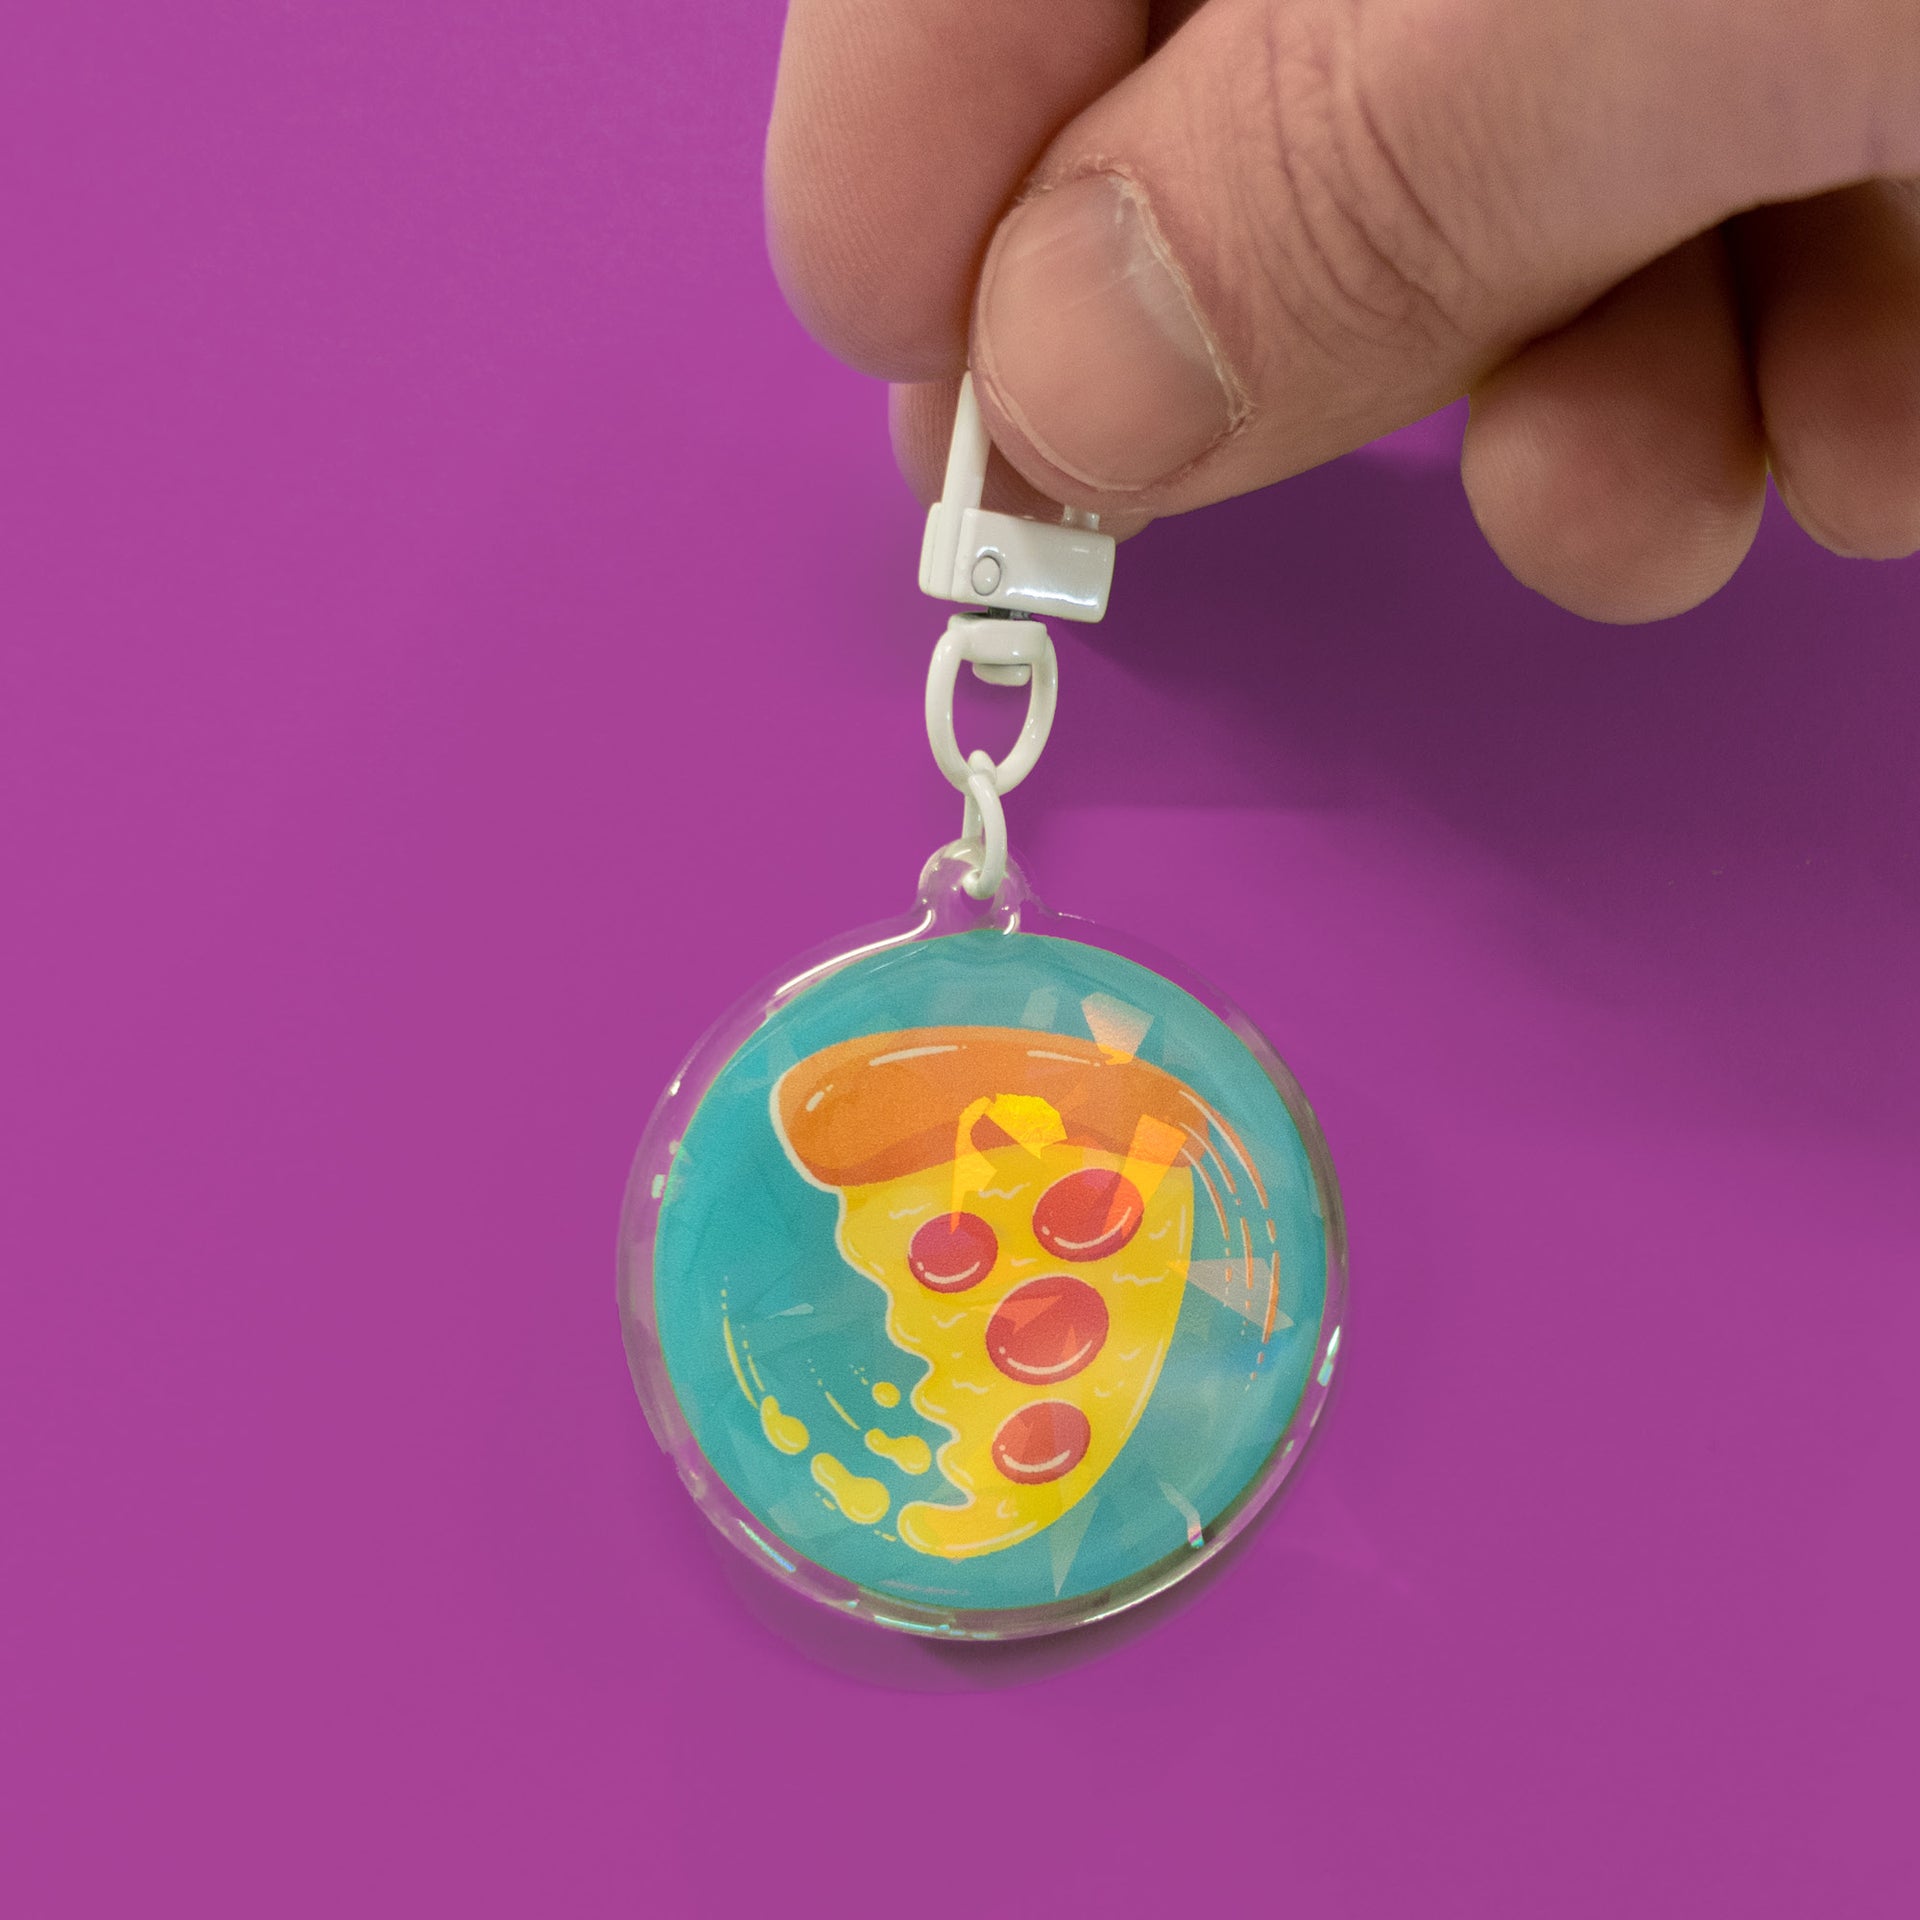 swirling pizza art on a circular holographic keychain in hand